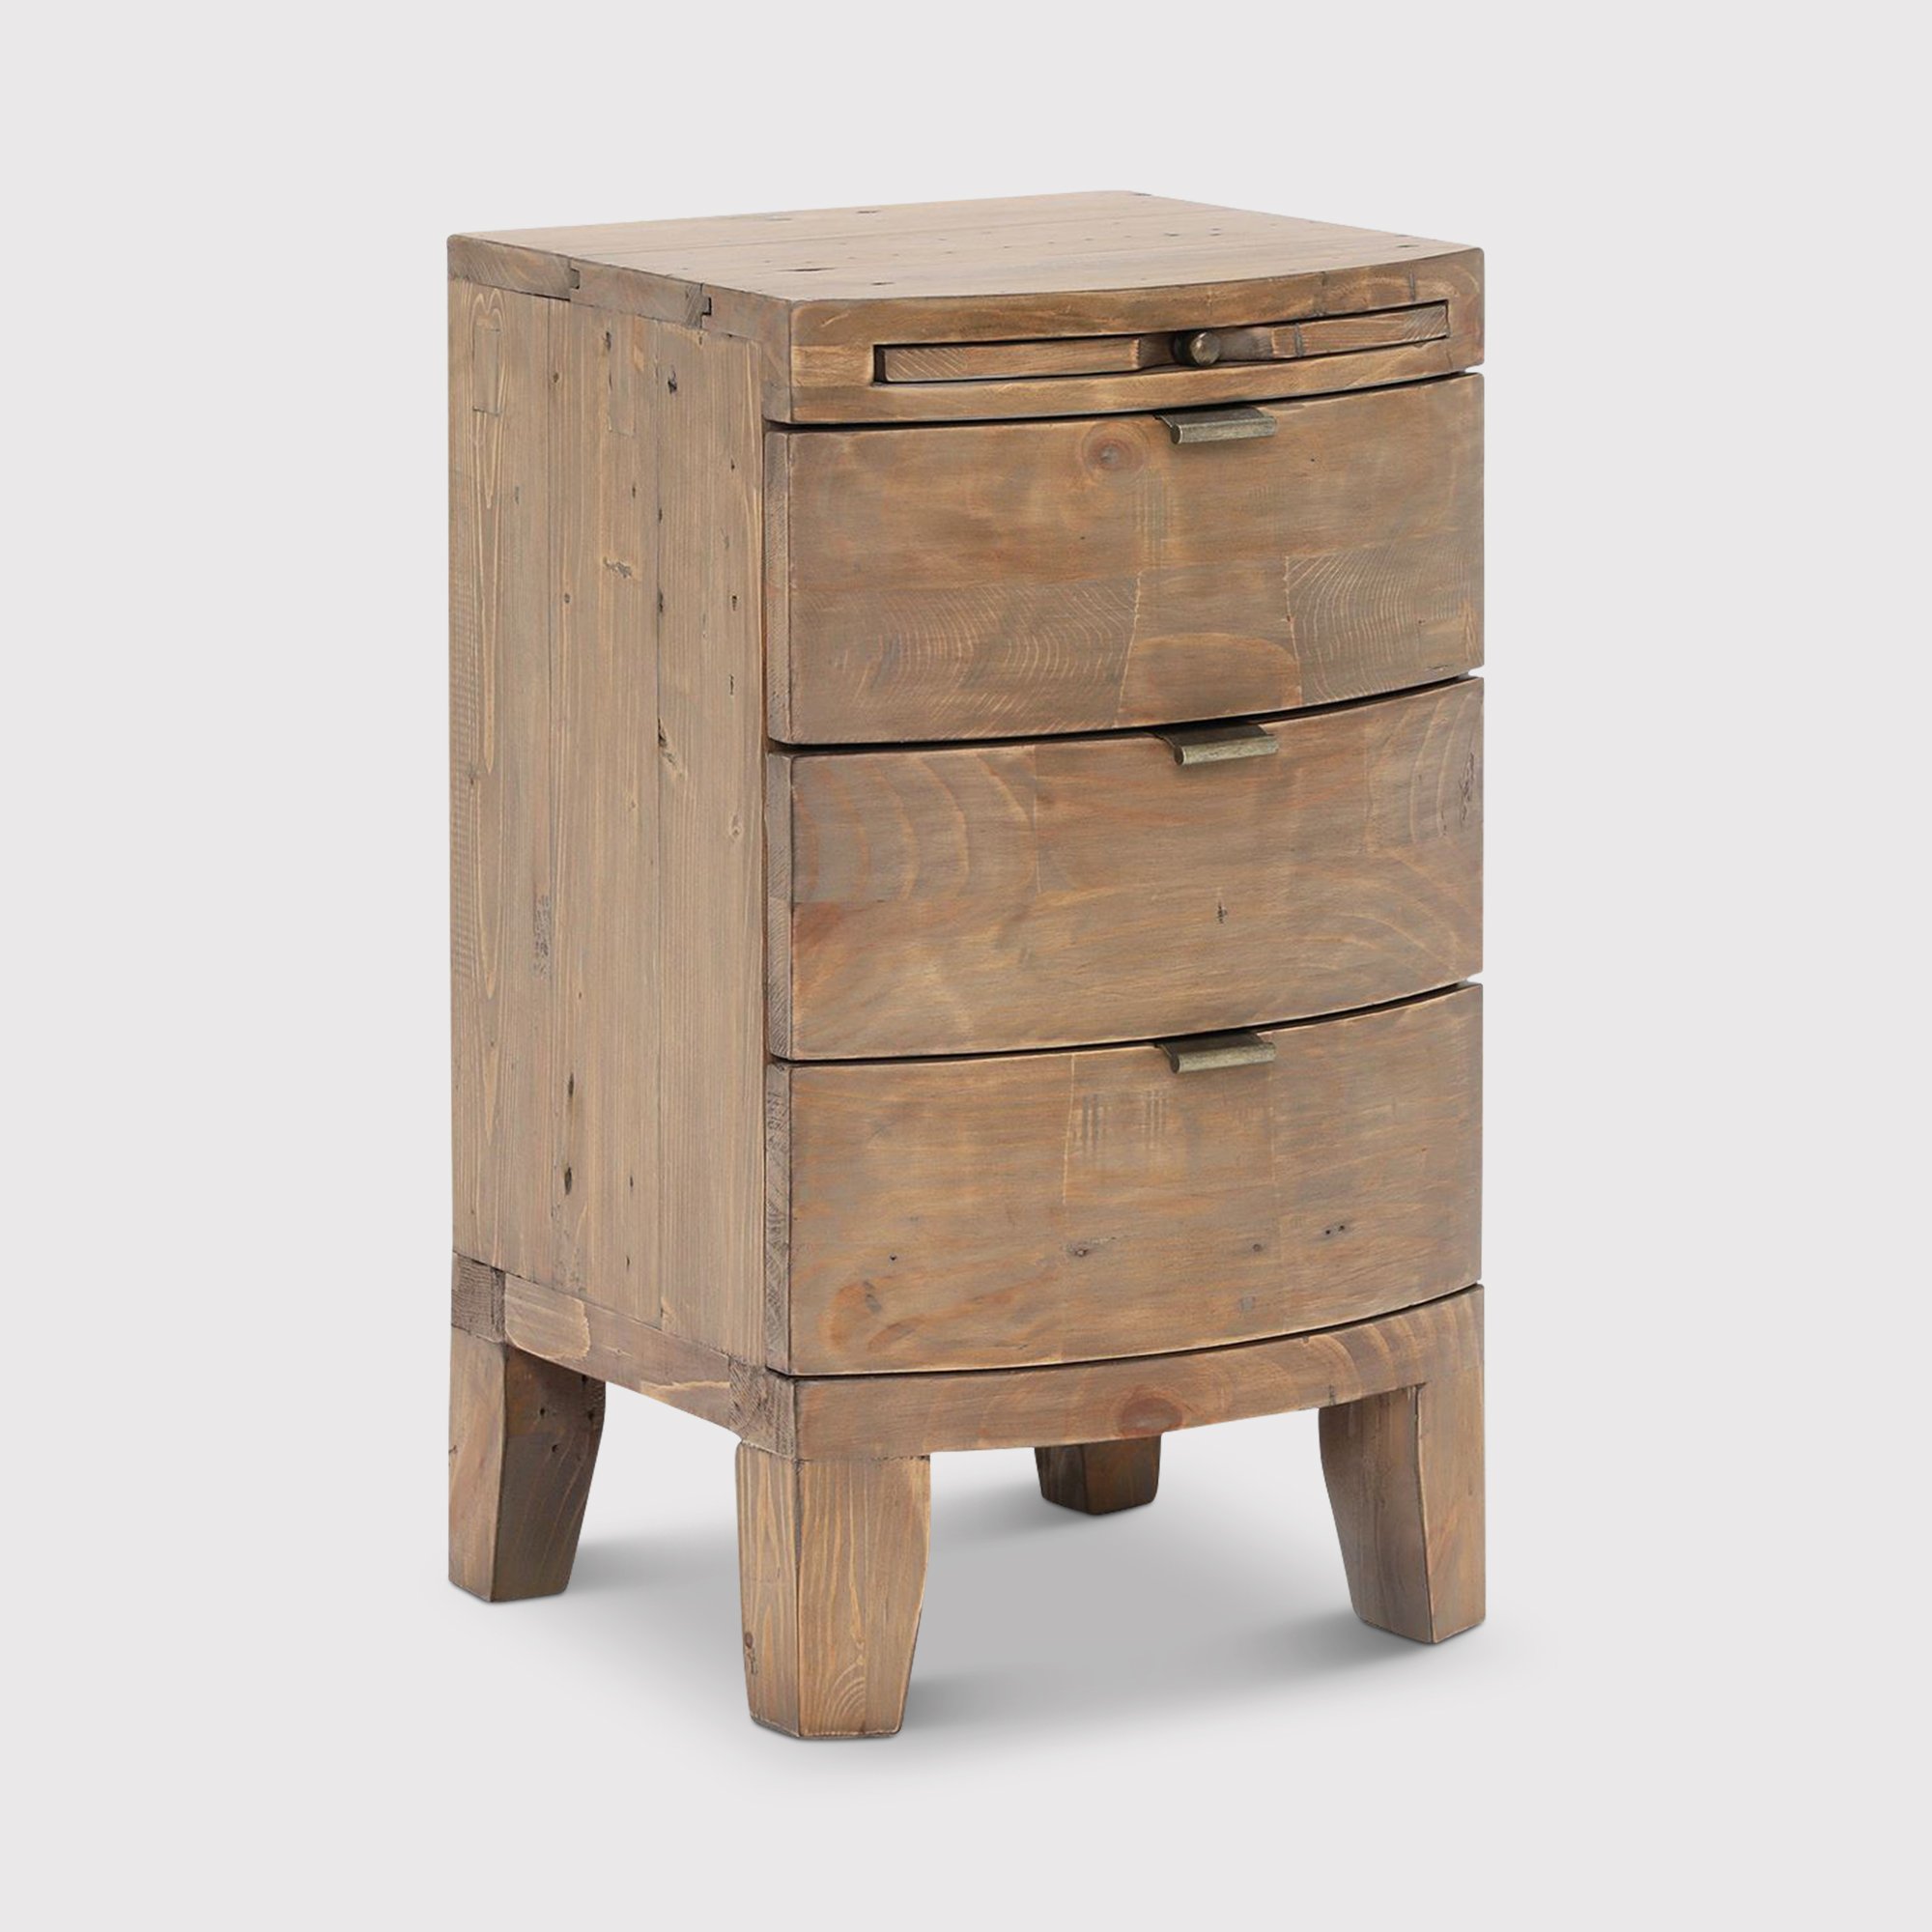 Rye 3 Drawer Bow Front Bedside Table, Neutral Wood | Barker & Stonehouse